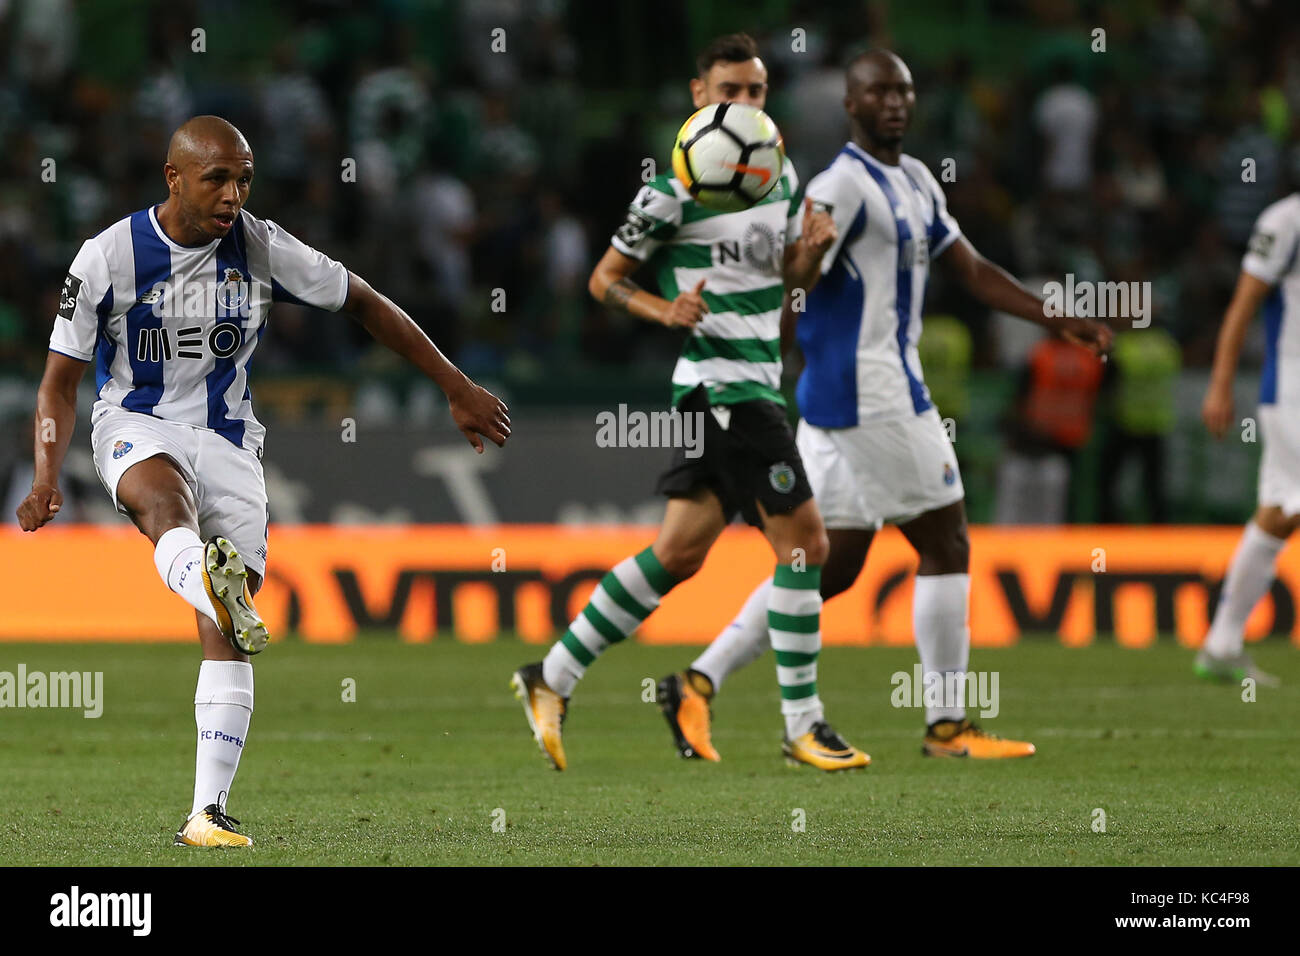 Lisbon, Portugal. 01st Oct, 2017. FC PortoÕs forward Yacine Brahimi from Algeria during Premier League 2017/18 match between Sporting CP and FC Porto, at Alvalade Stadium in Lisbon on October 1, 2017. (Photo by Bruno Barros / DPI) Credit: Bruno Barros/Alamy Live News Stock Photo